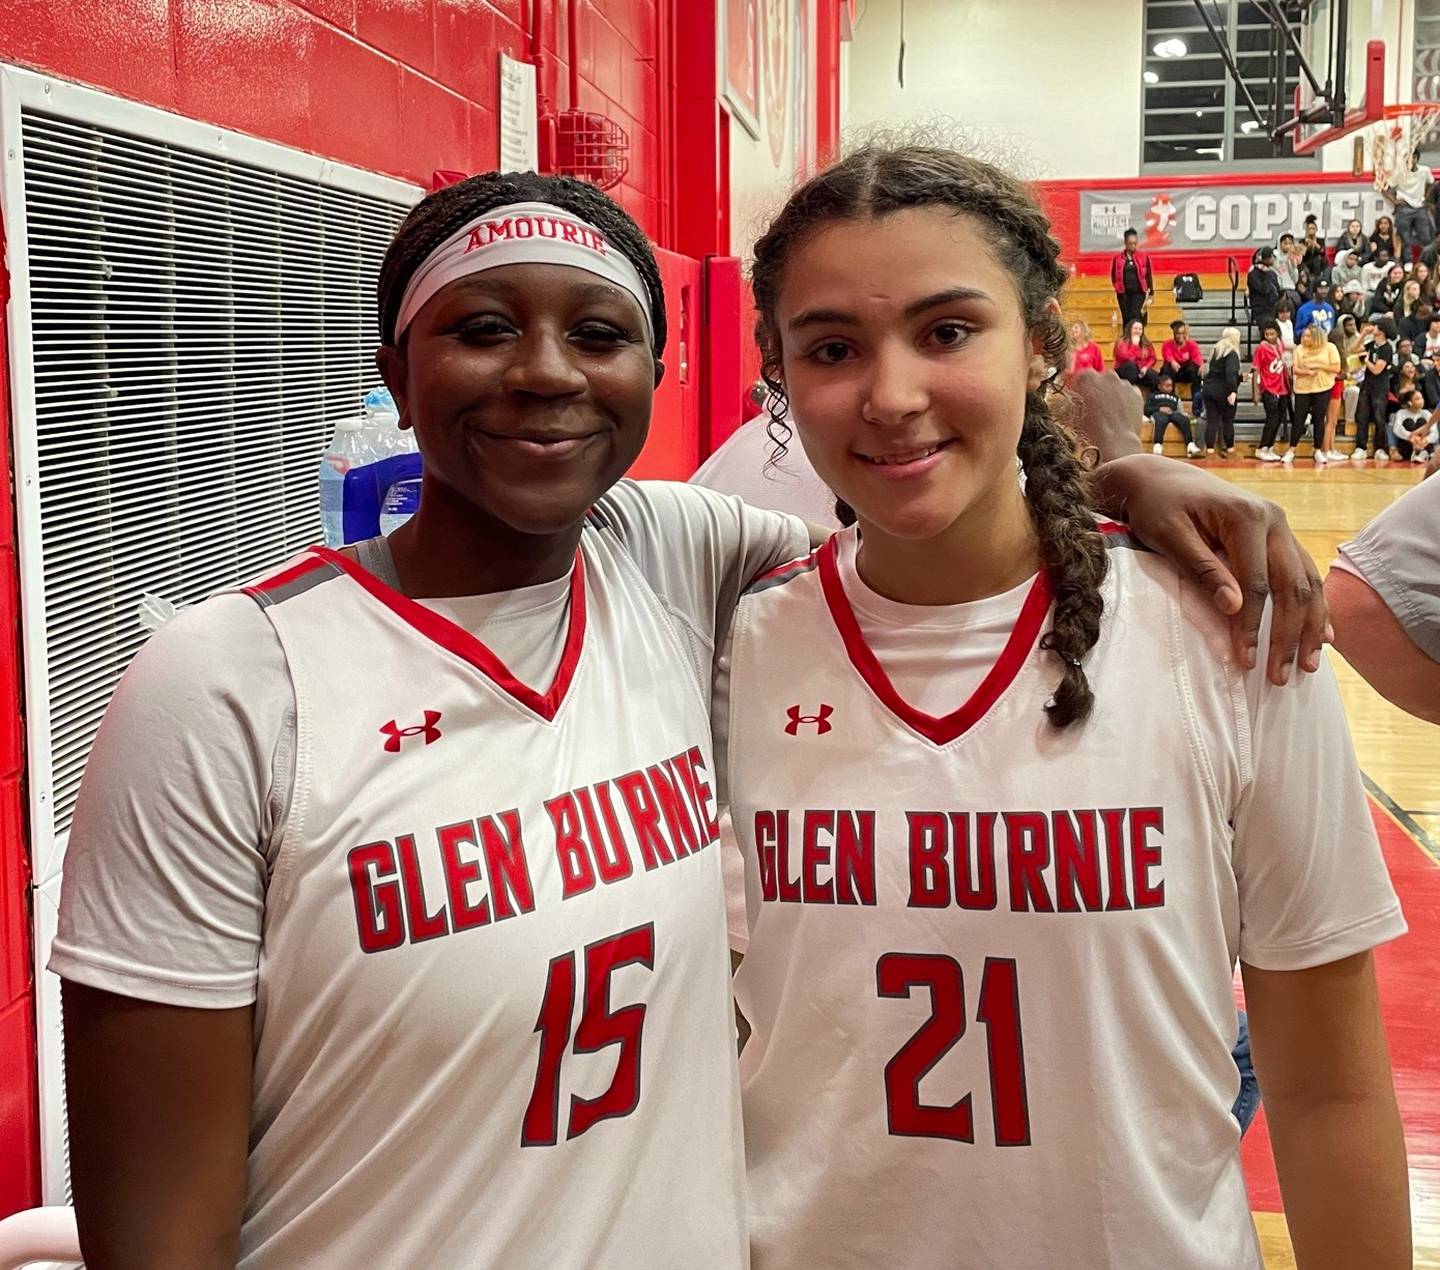 Amourie Porter (left) and Lania Nick helped Glen Burnie successfully begin its defense of the Anne Arundel County girls basketball crown. Porter scored a game-high 24 points and Nick finished with 16 as the No. 6 Gophers defeated No. 8 Old Mill, 59-47, in the league opener for both teams.